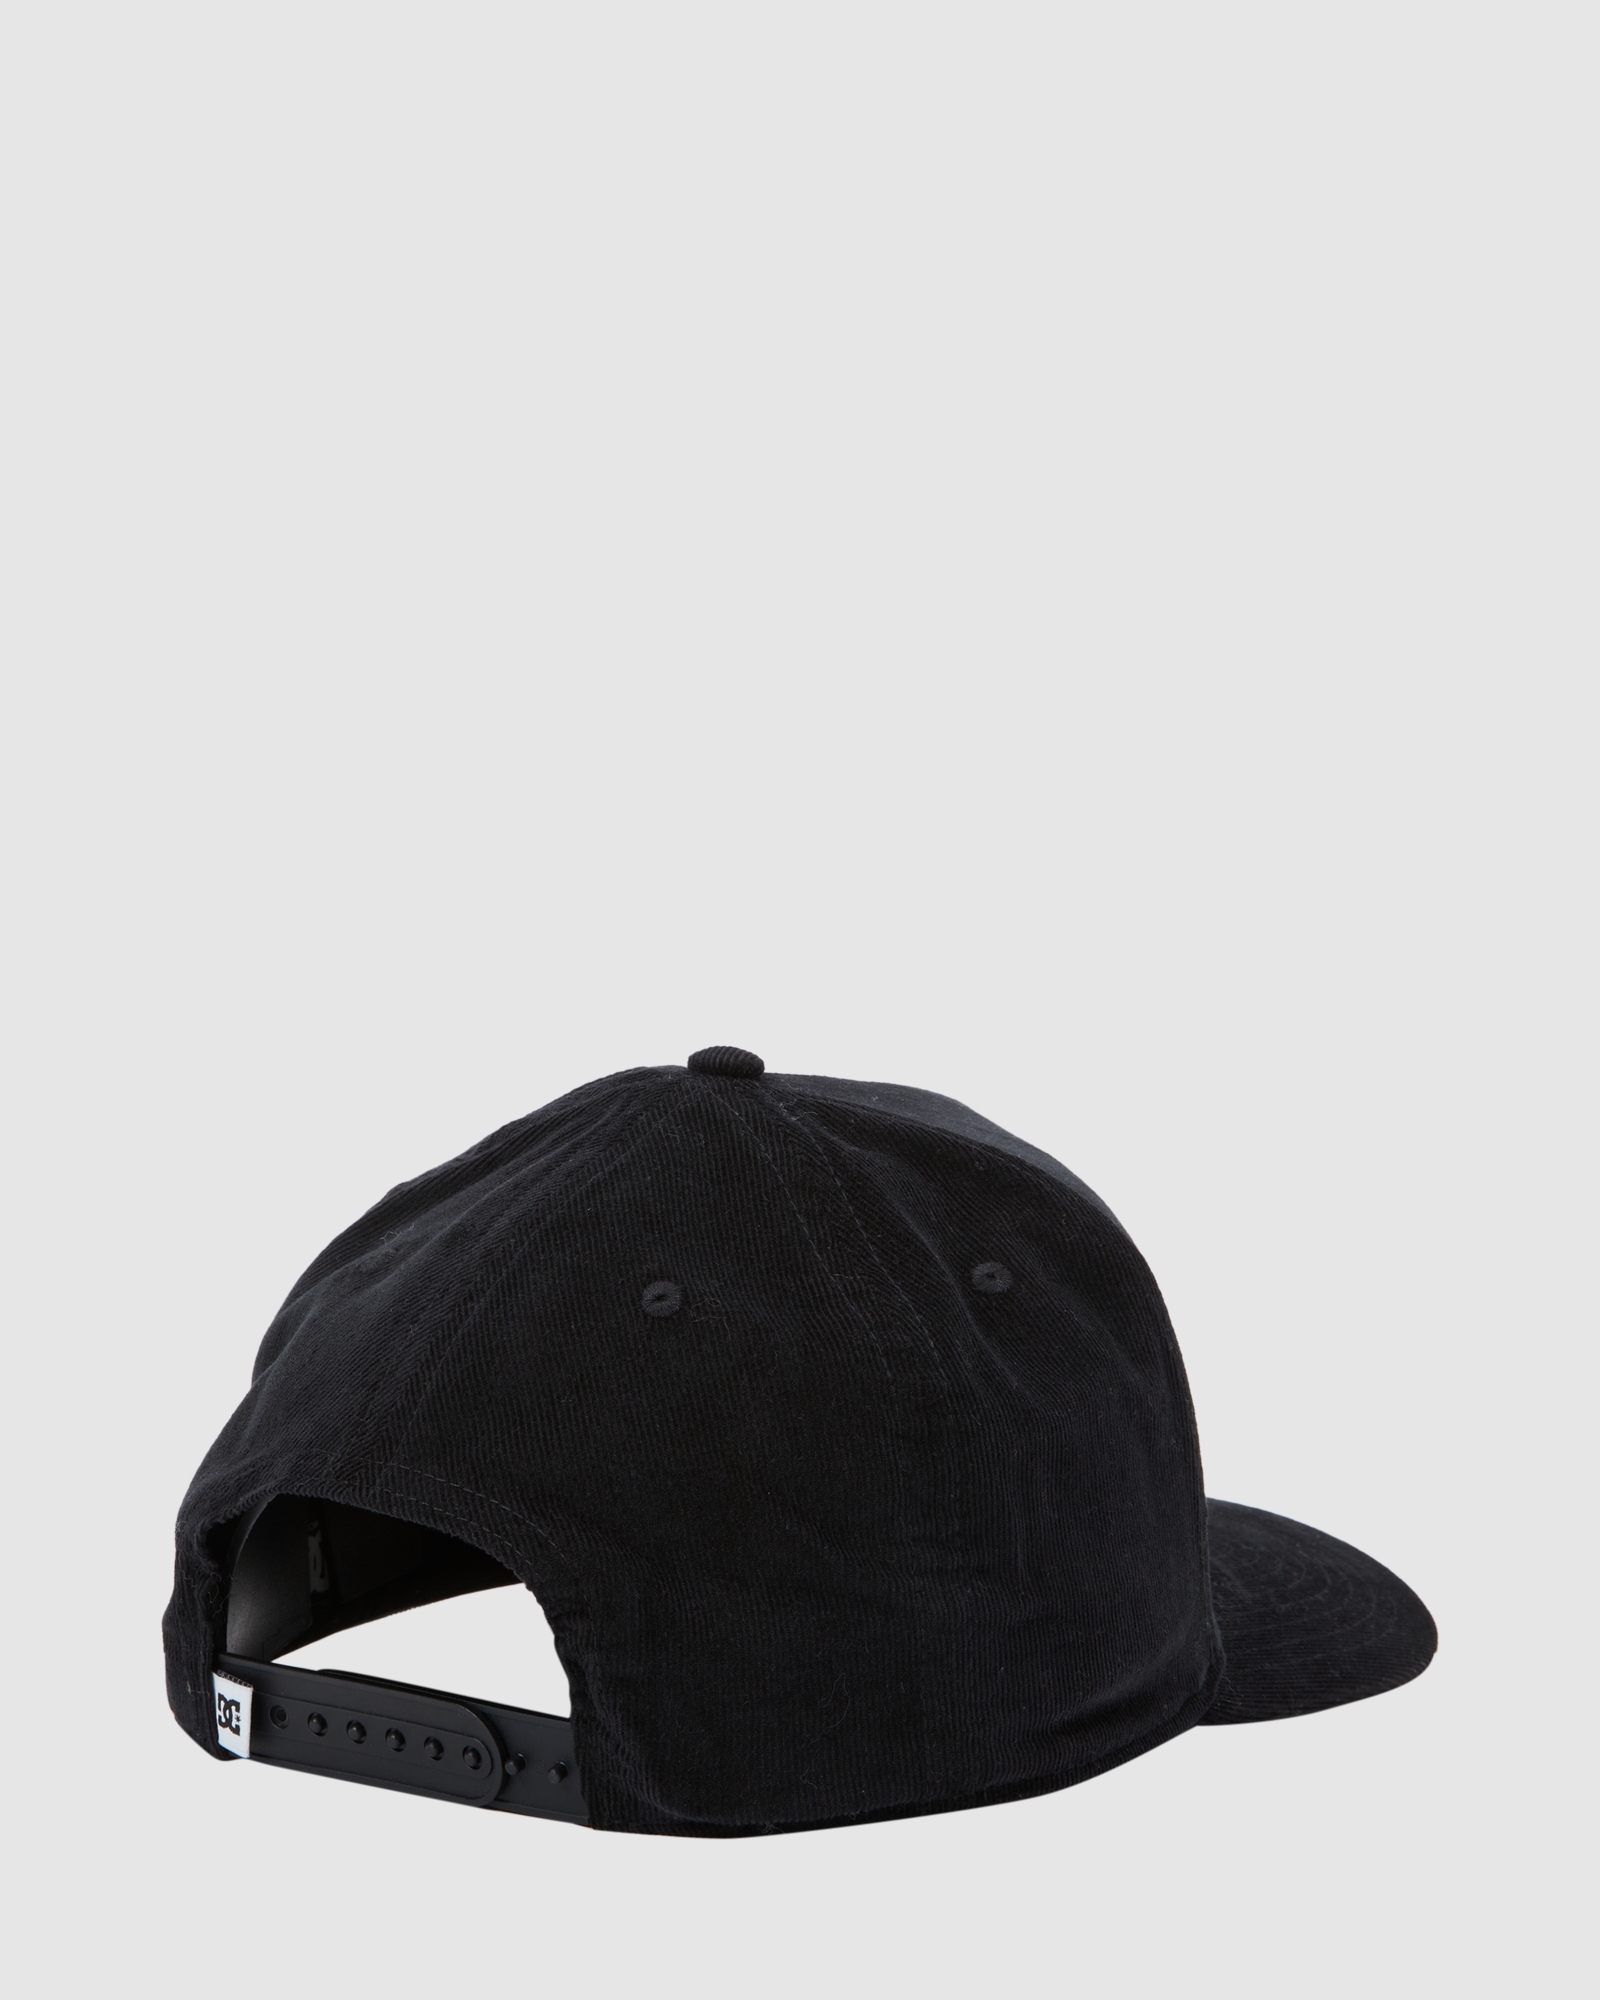 Dc Shoes Dc Expo Snapback Hat - Black | SurfStitch